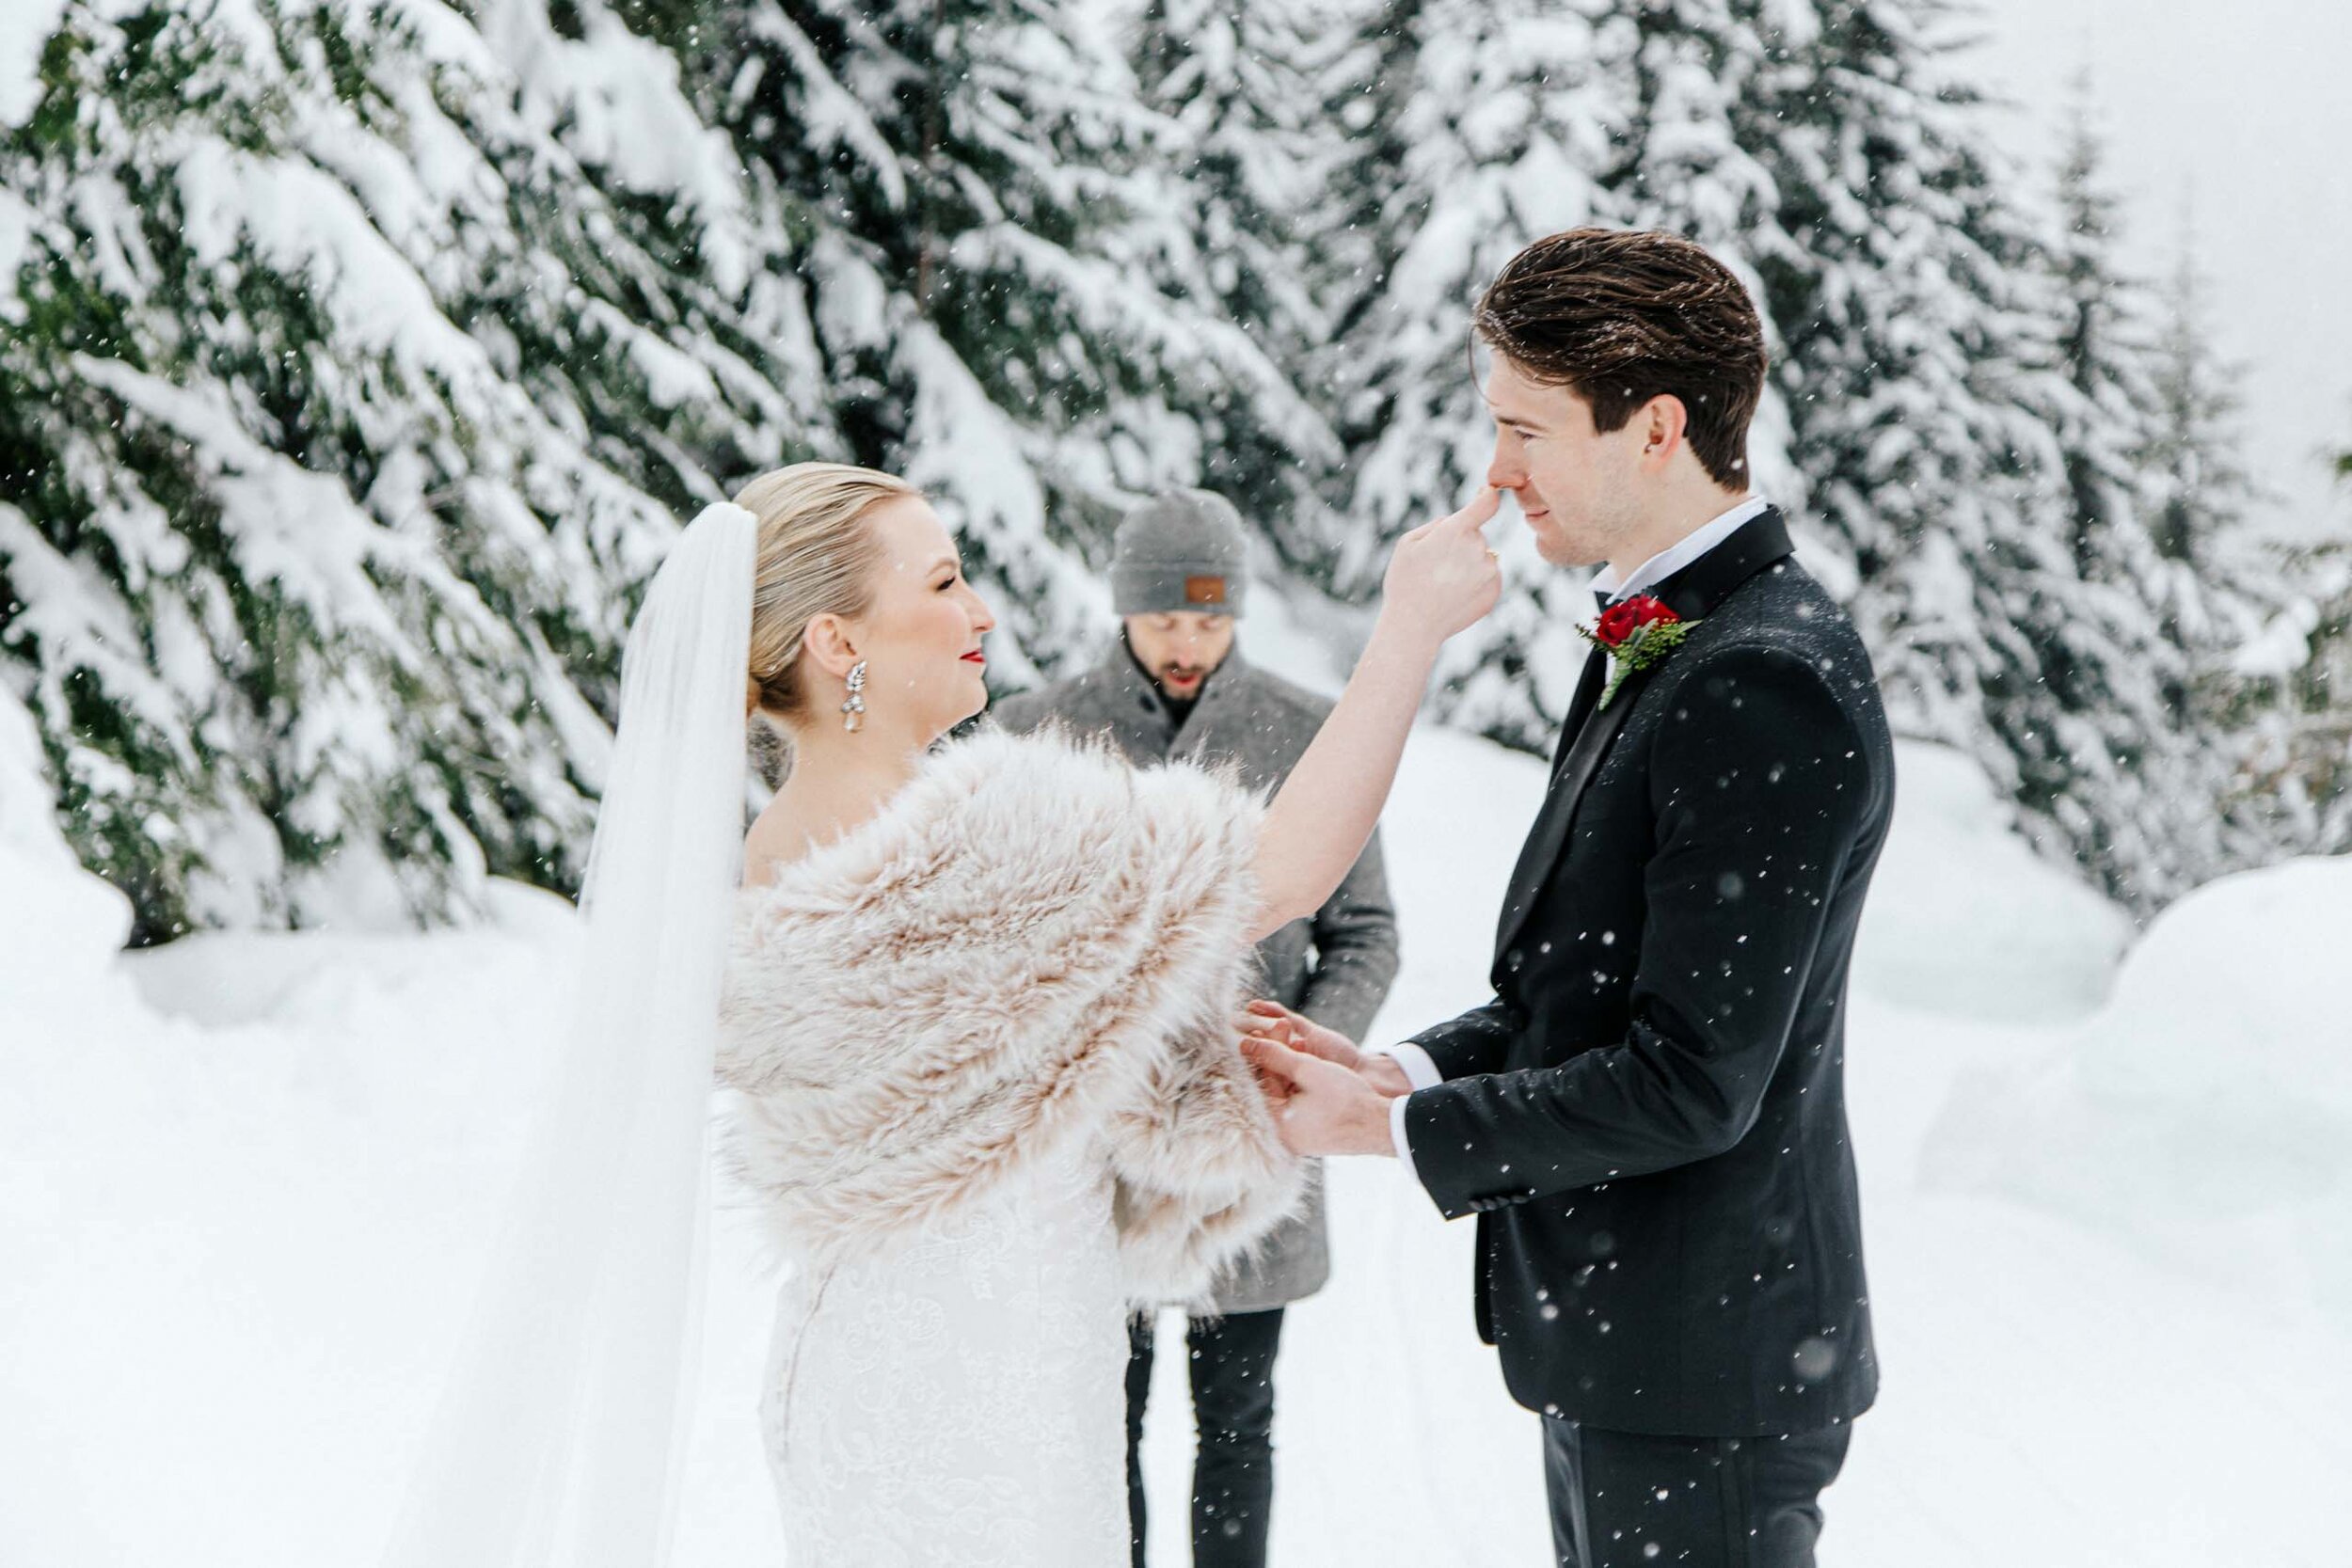 A snowy bride wipes her grooms nose as the snow drifts around them during their small ceremony in Whistler, BC.